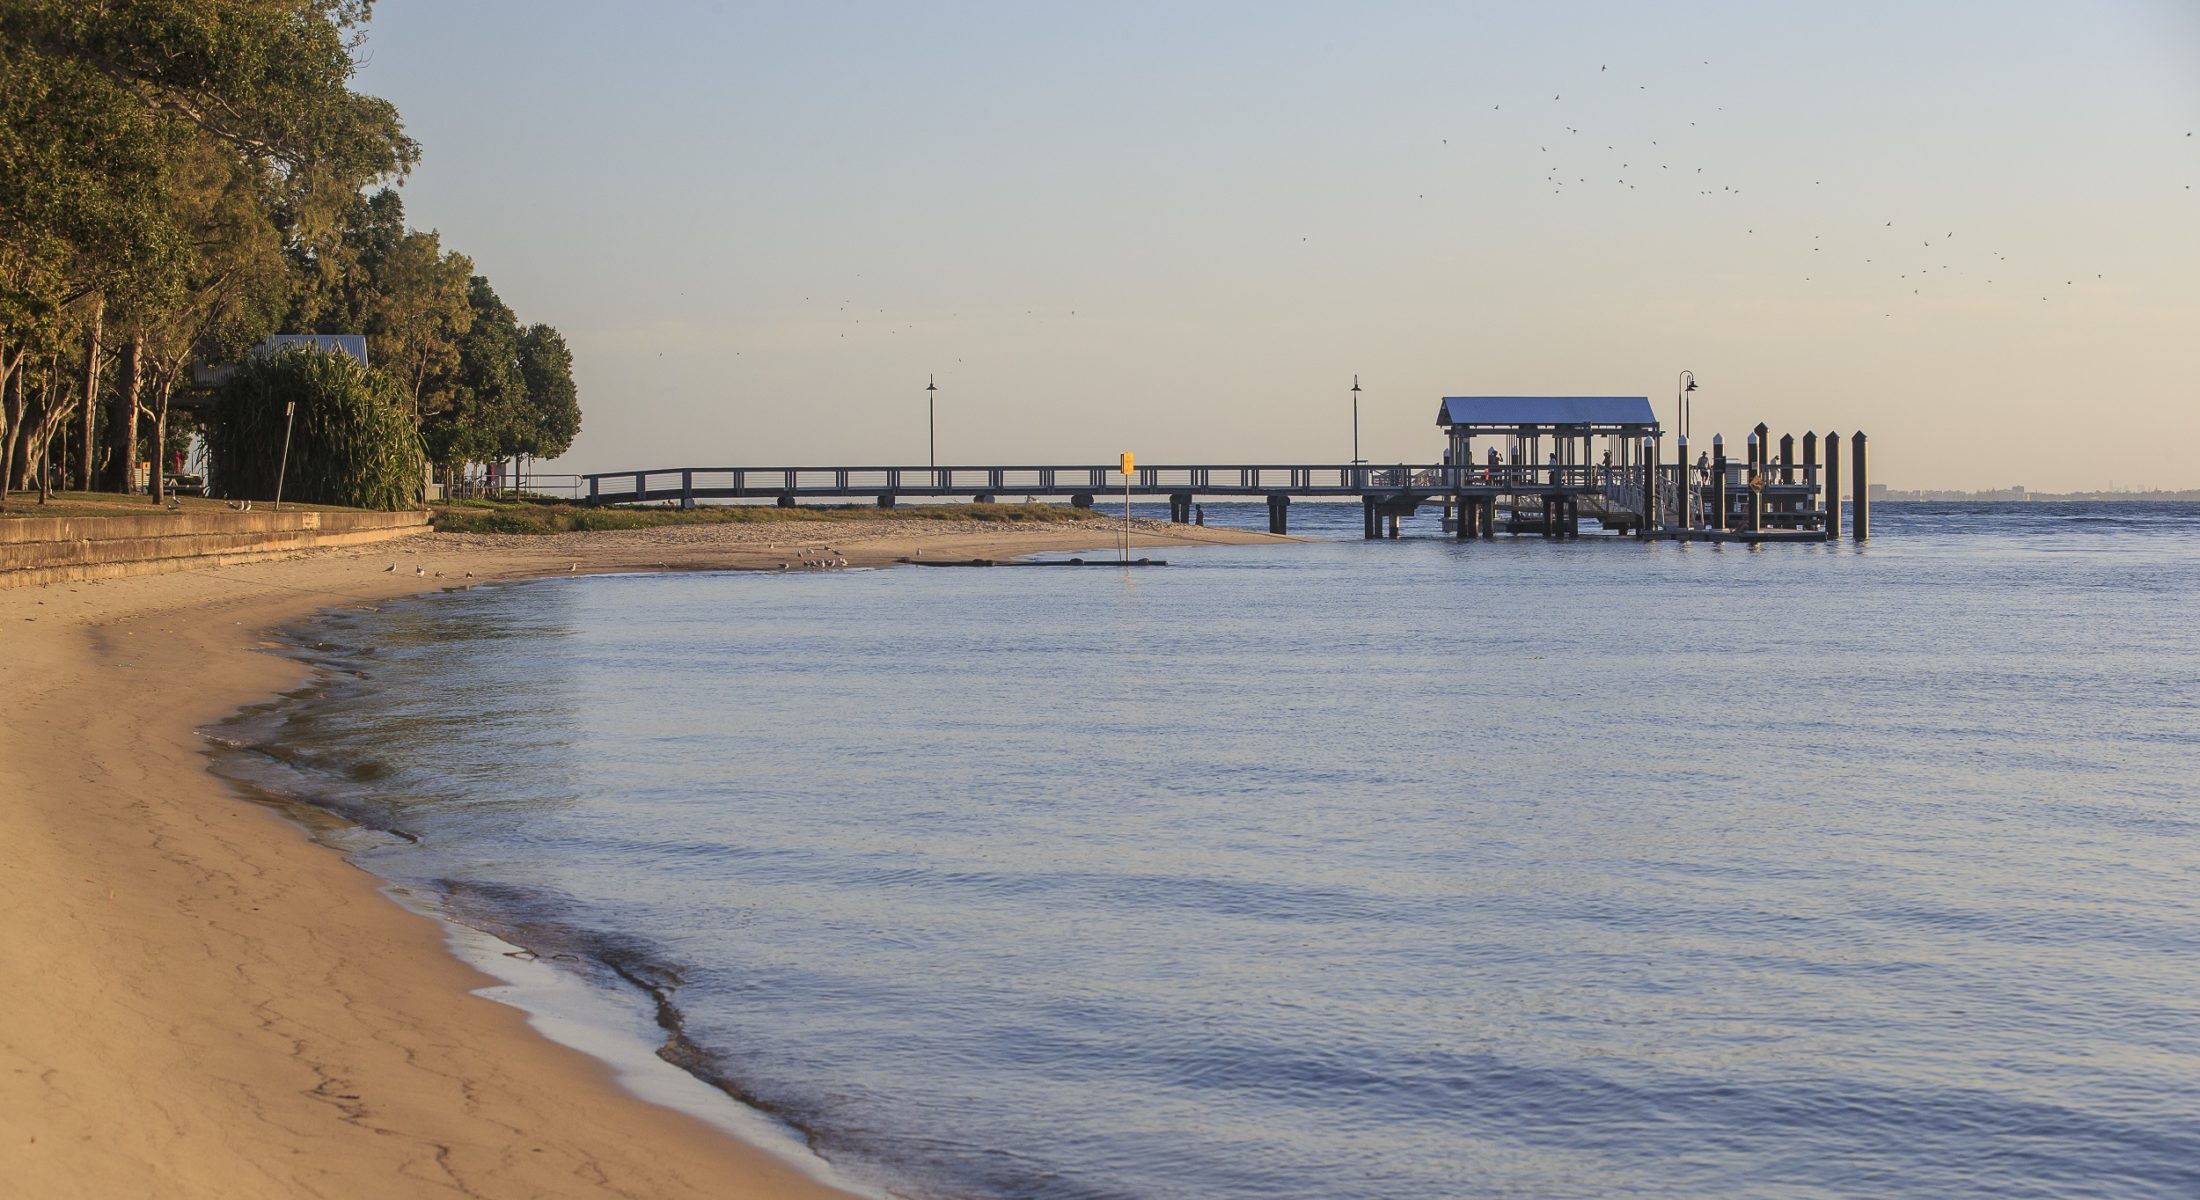 Bongaree is a popular beach for families to explore